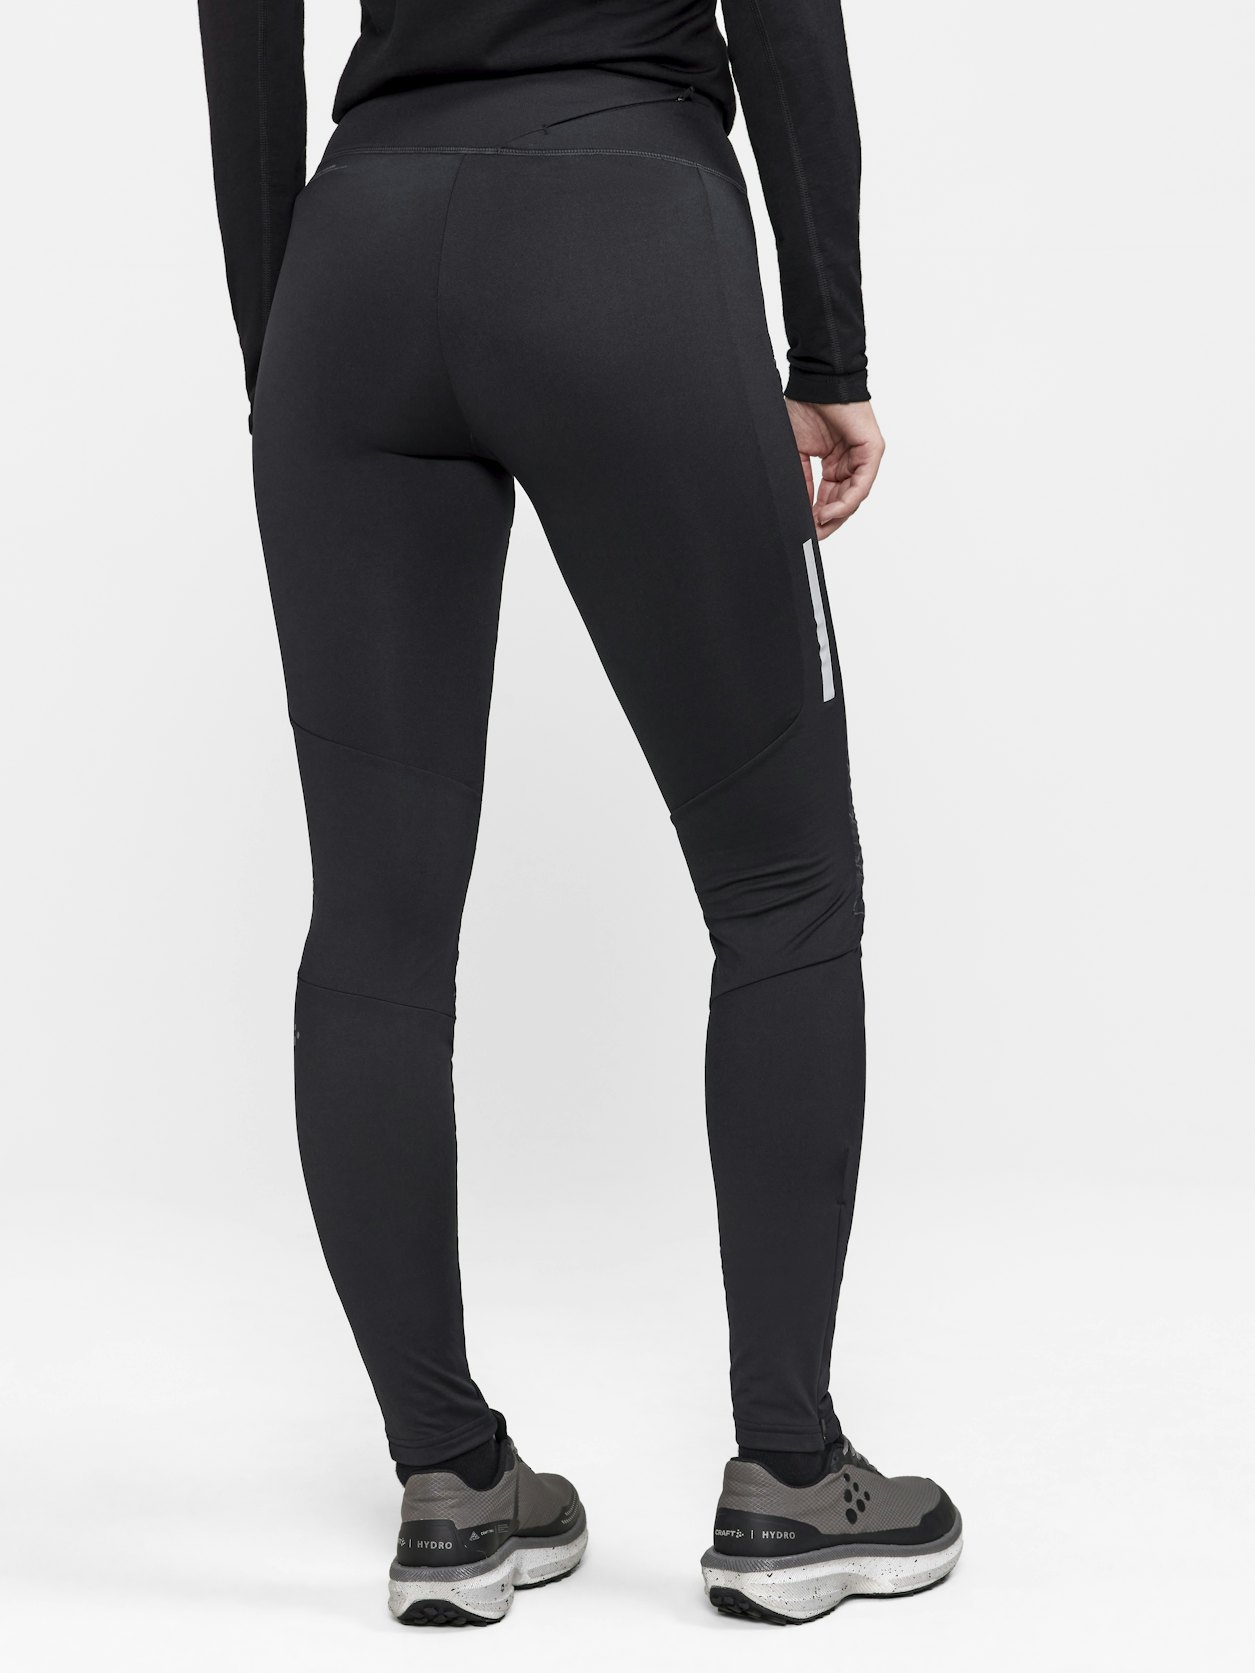 SoulCycle X Target Gray Athletic Leggings for Women